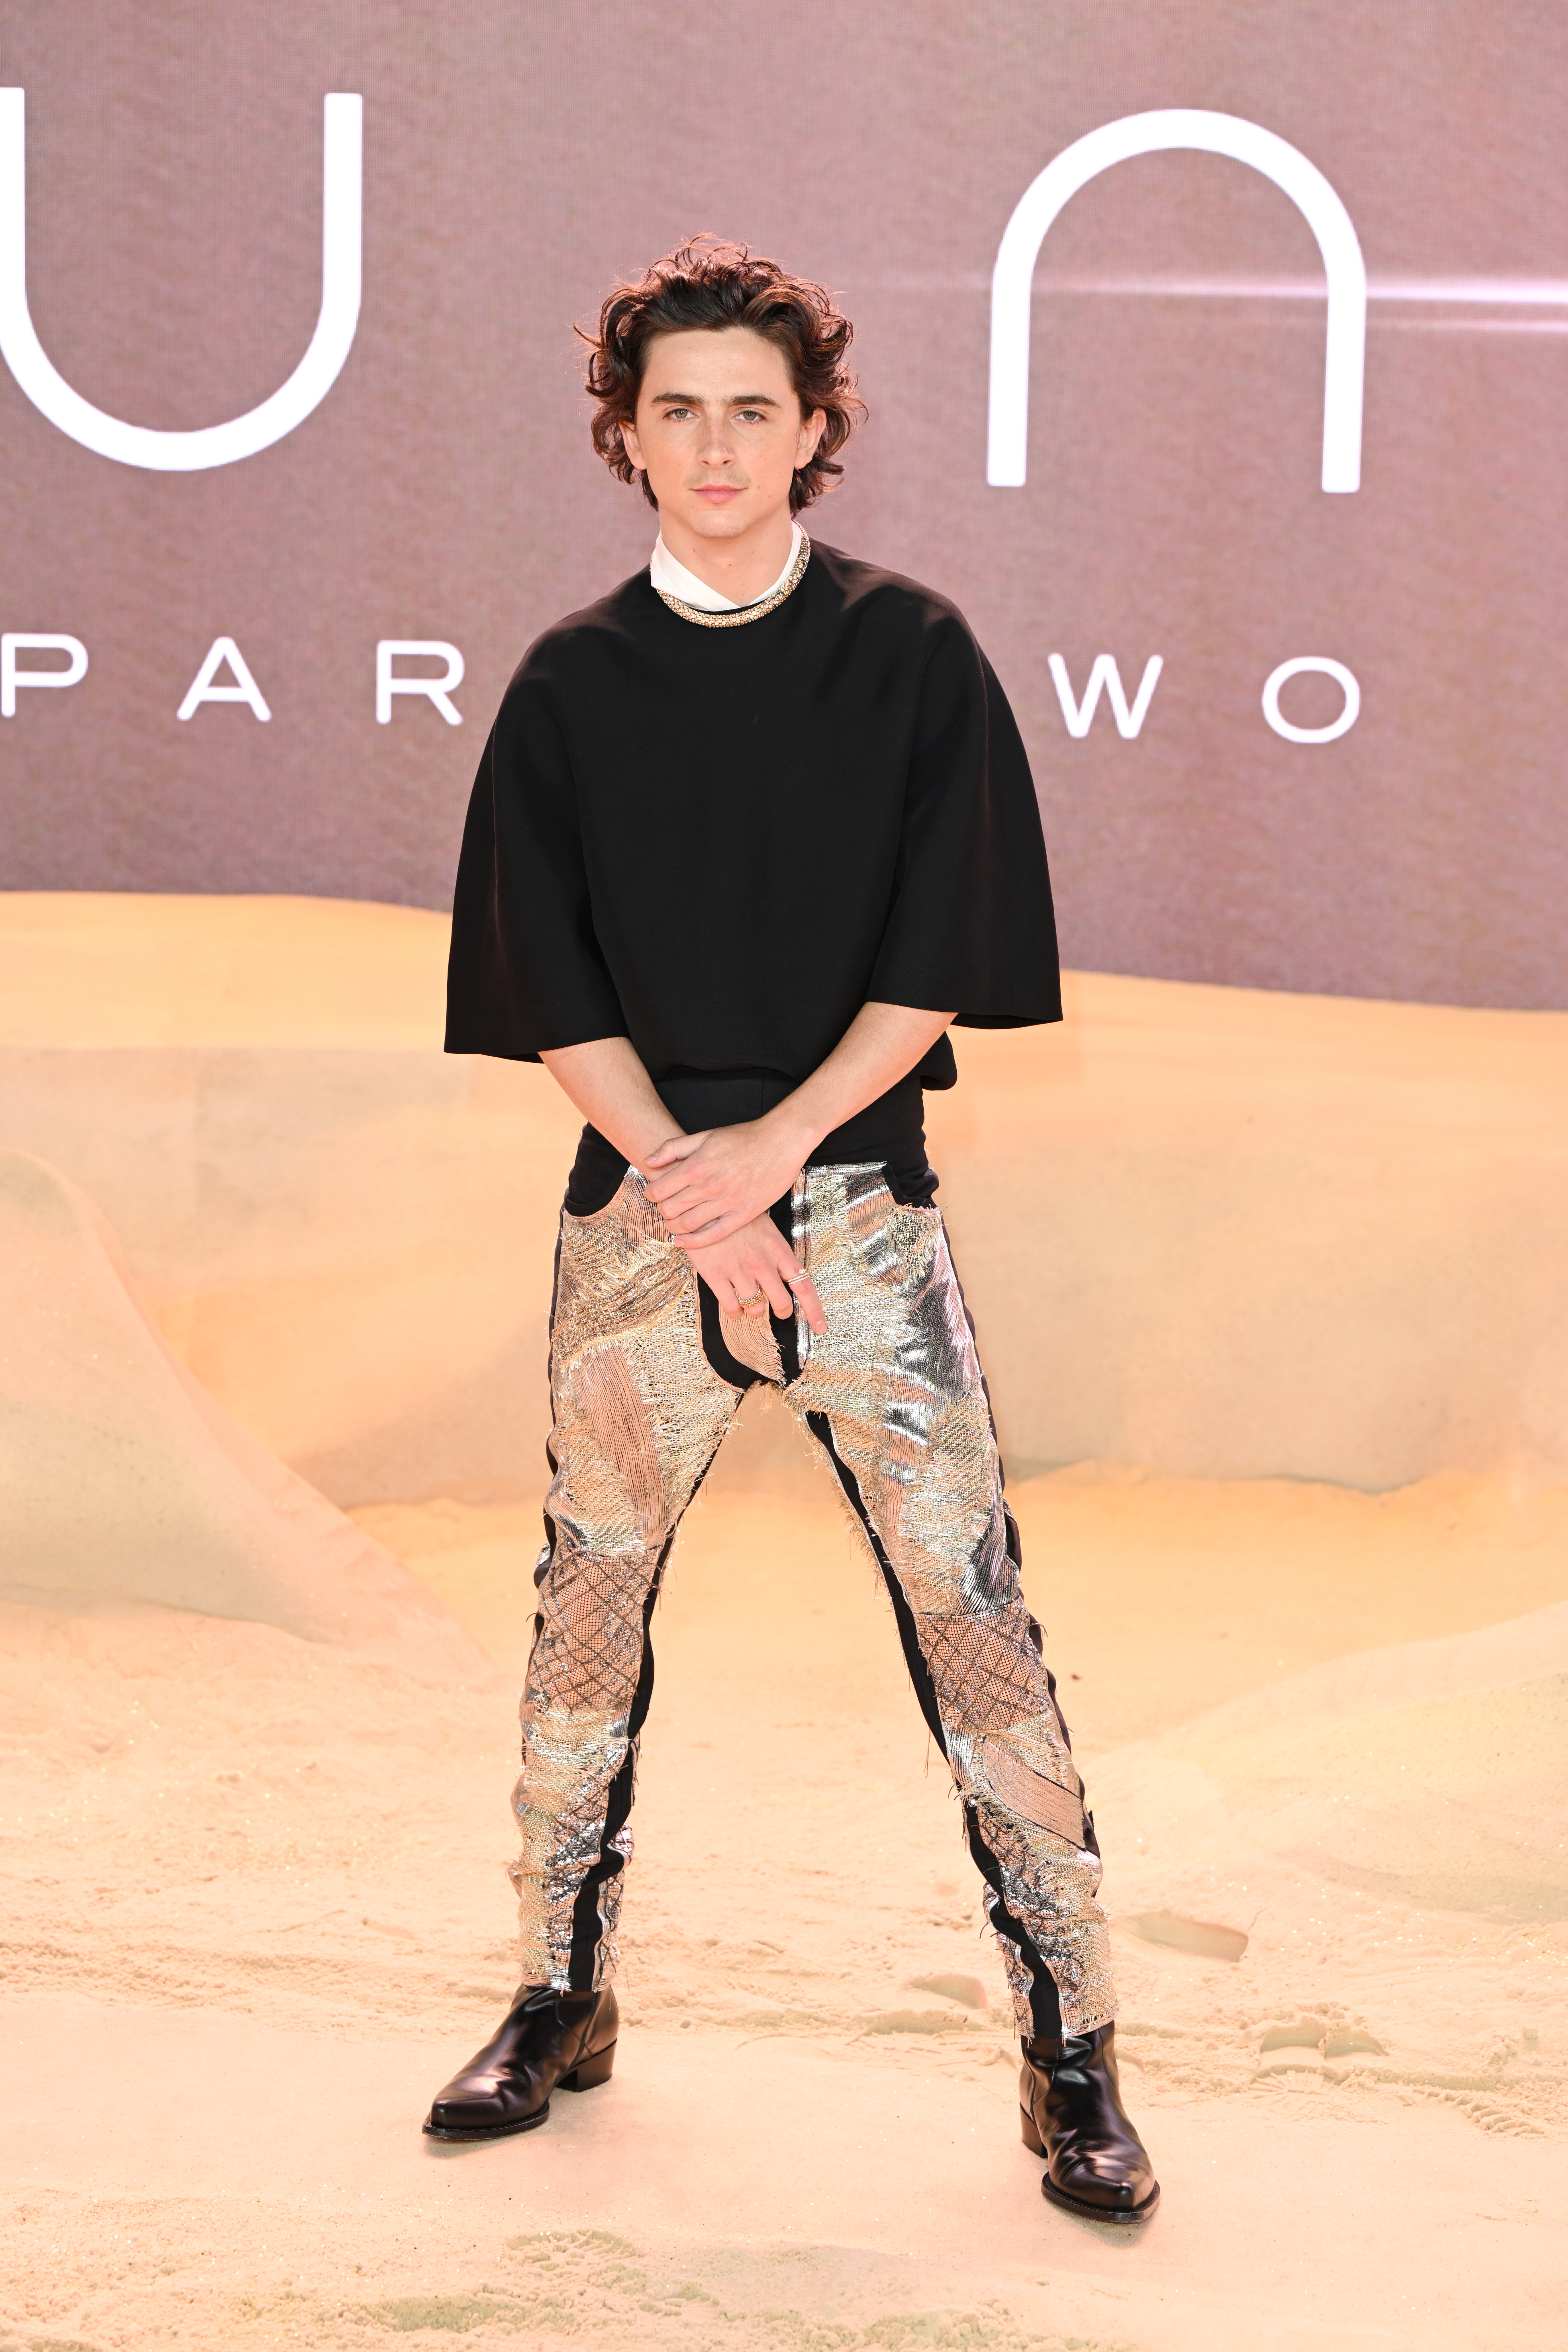 Timothee attended without girlfriend Kylie Jenner